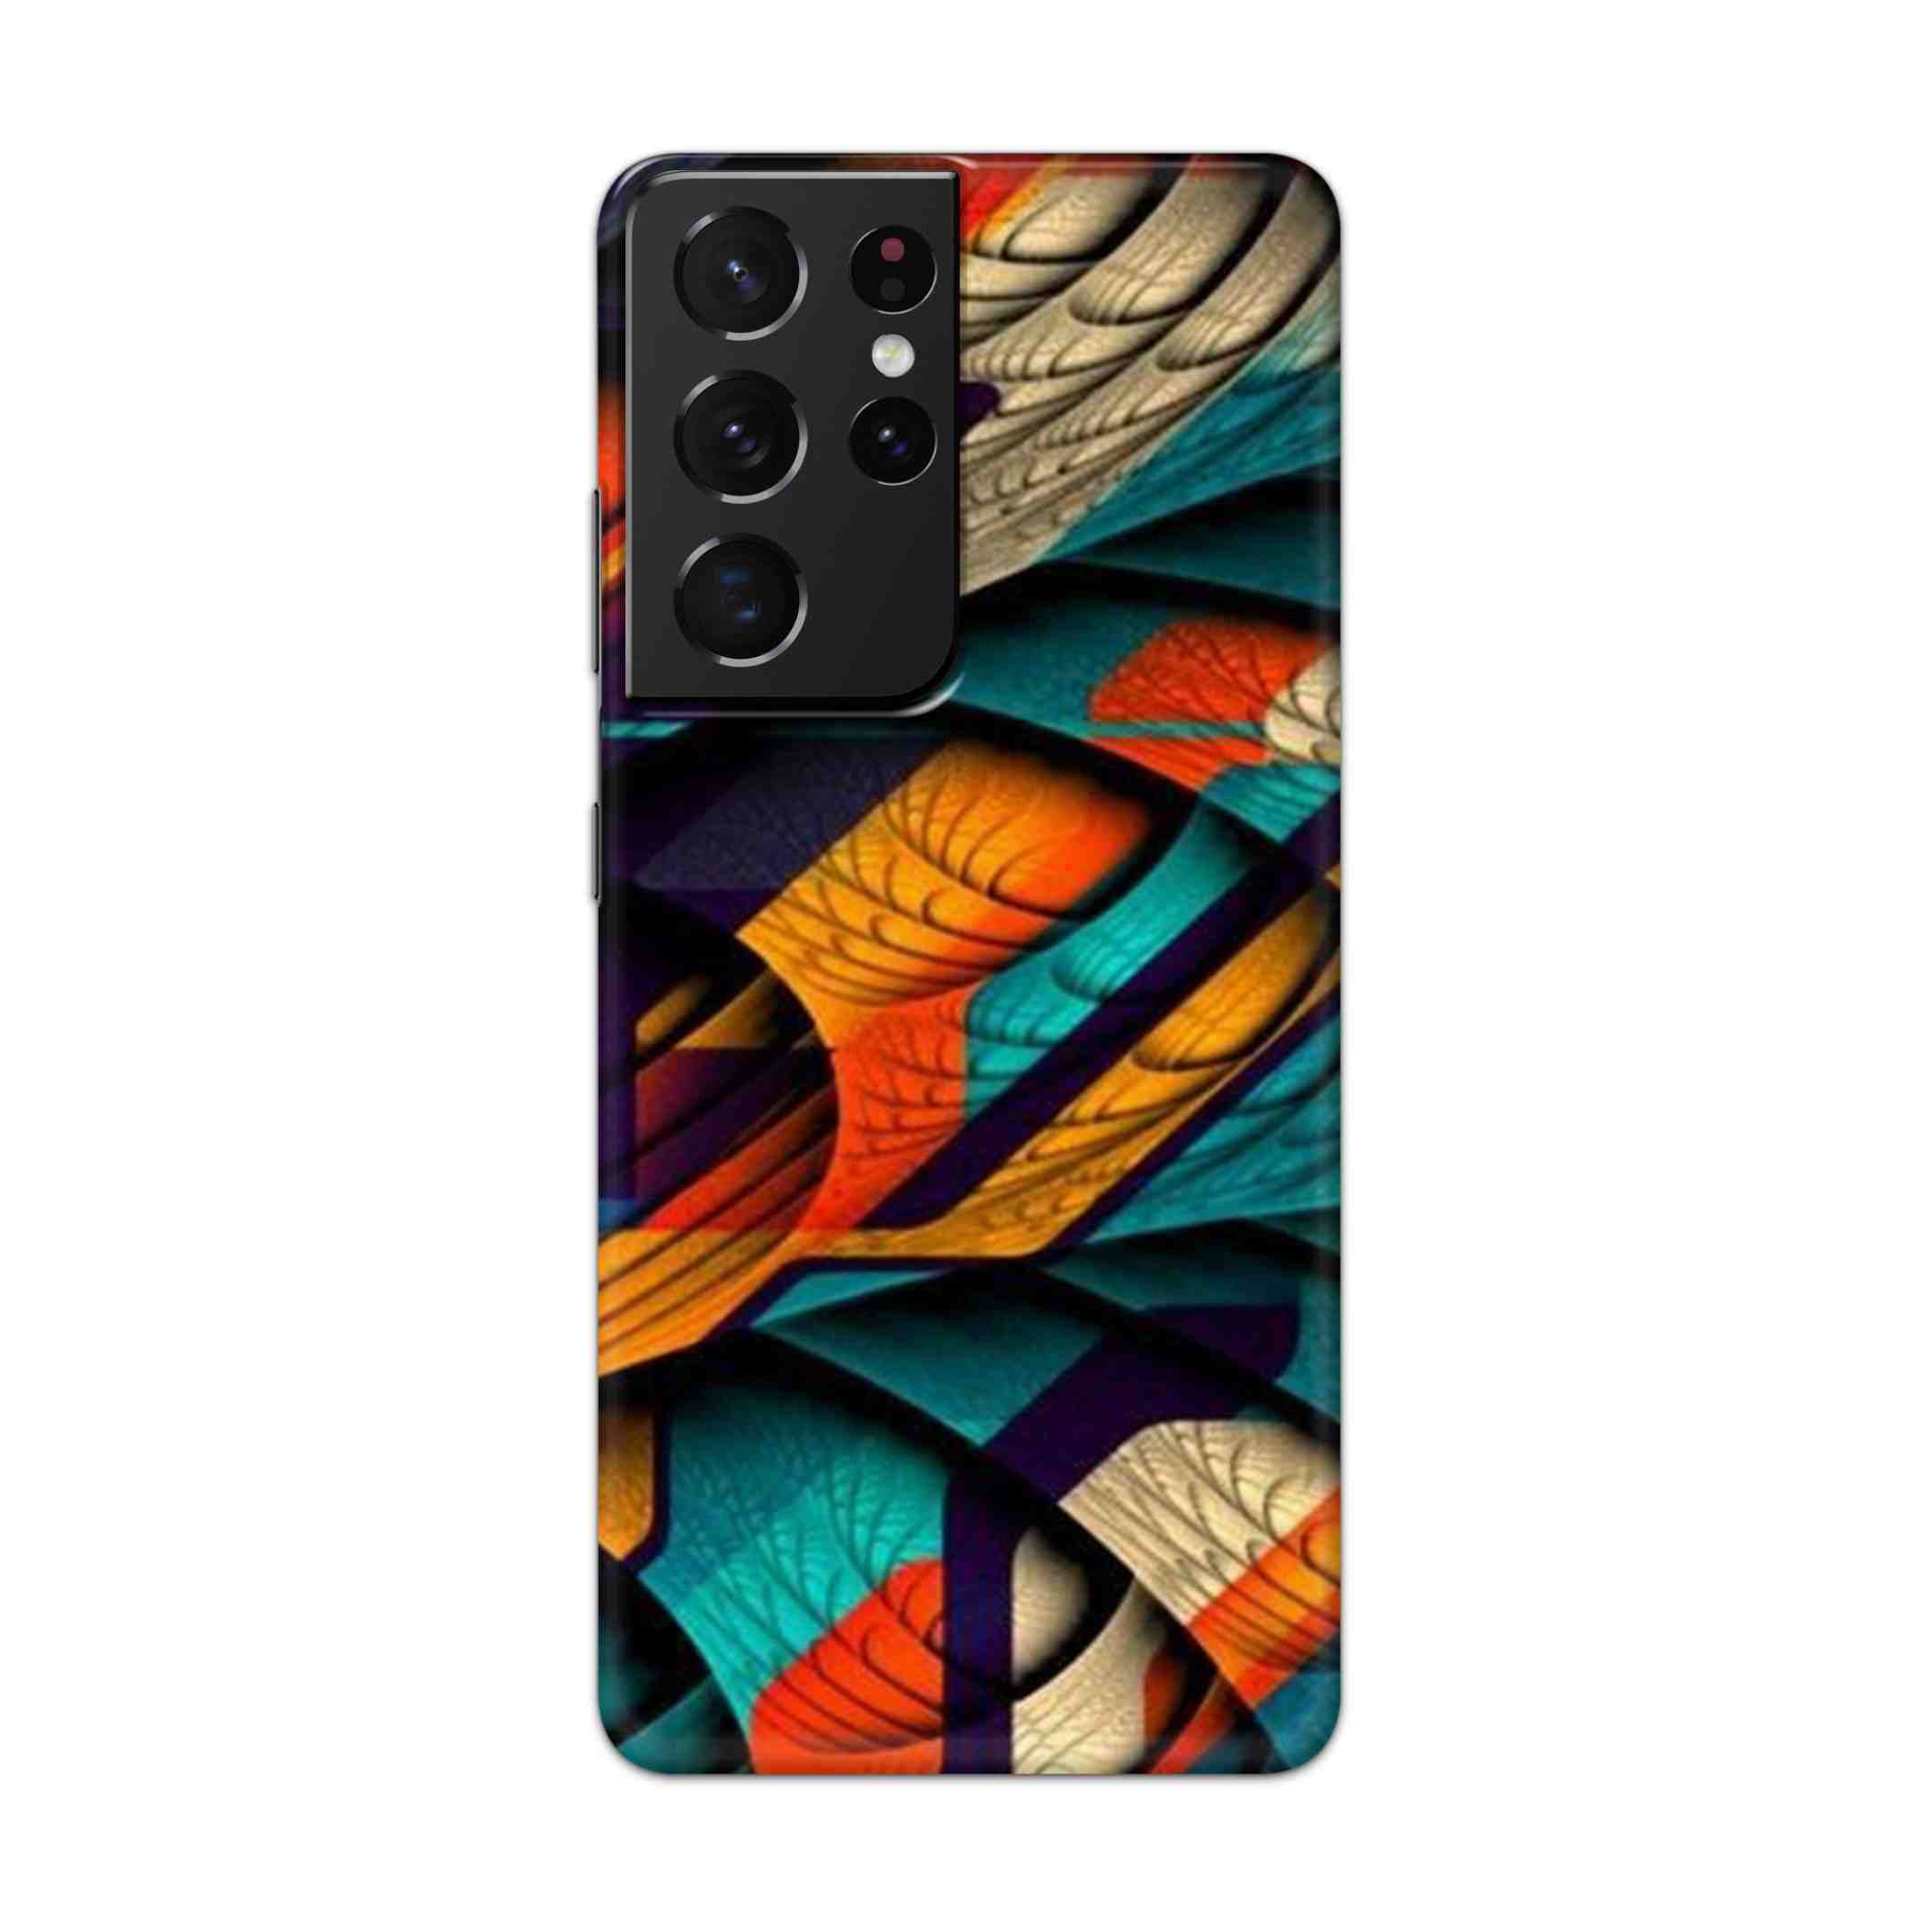 Buy Colour Abstract Hard Back Mobile Phone Case Cover For Samsung Galaxy S21 Ultra Online